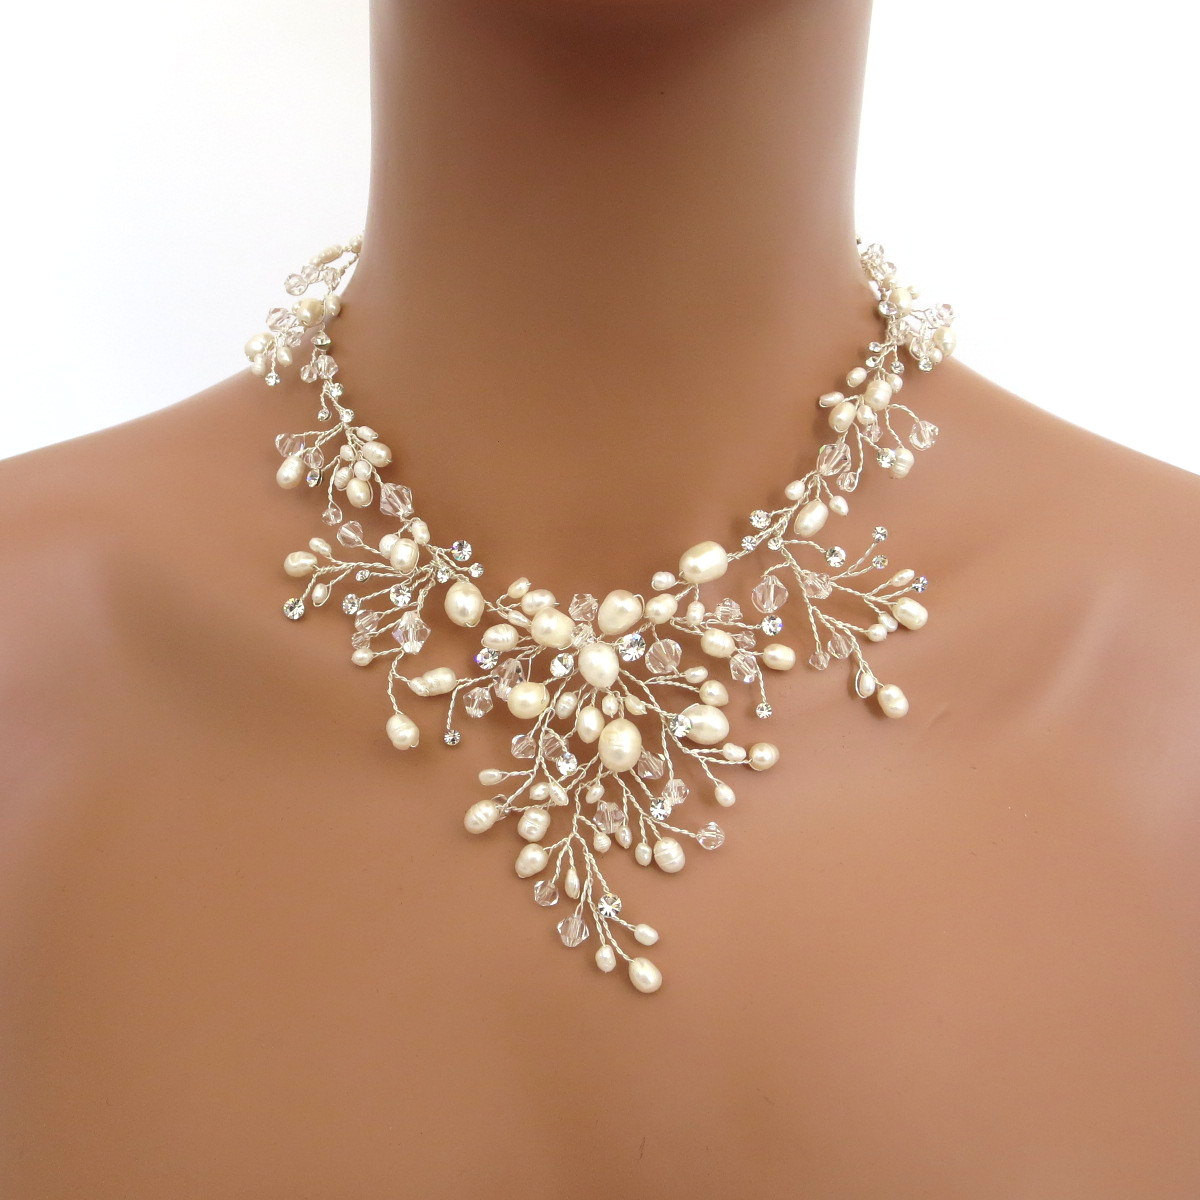 Pearl Bridal Jewelry Sets
 Bridal necklace Pearl necklace Wedding jewelry set